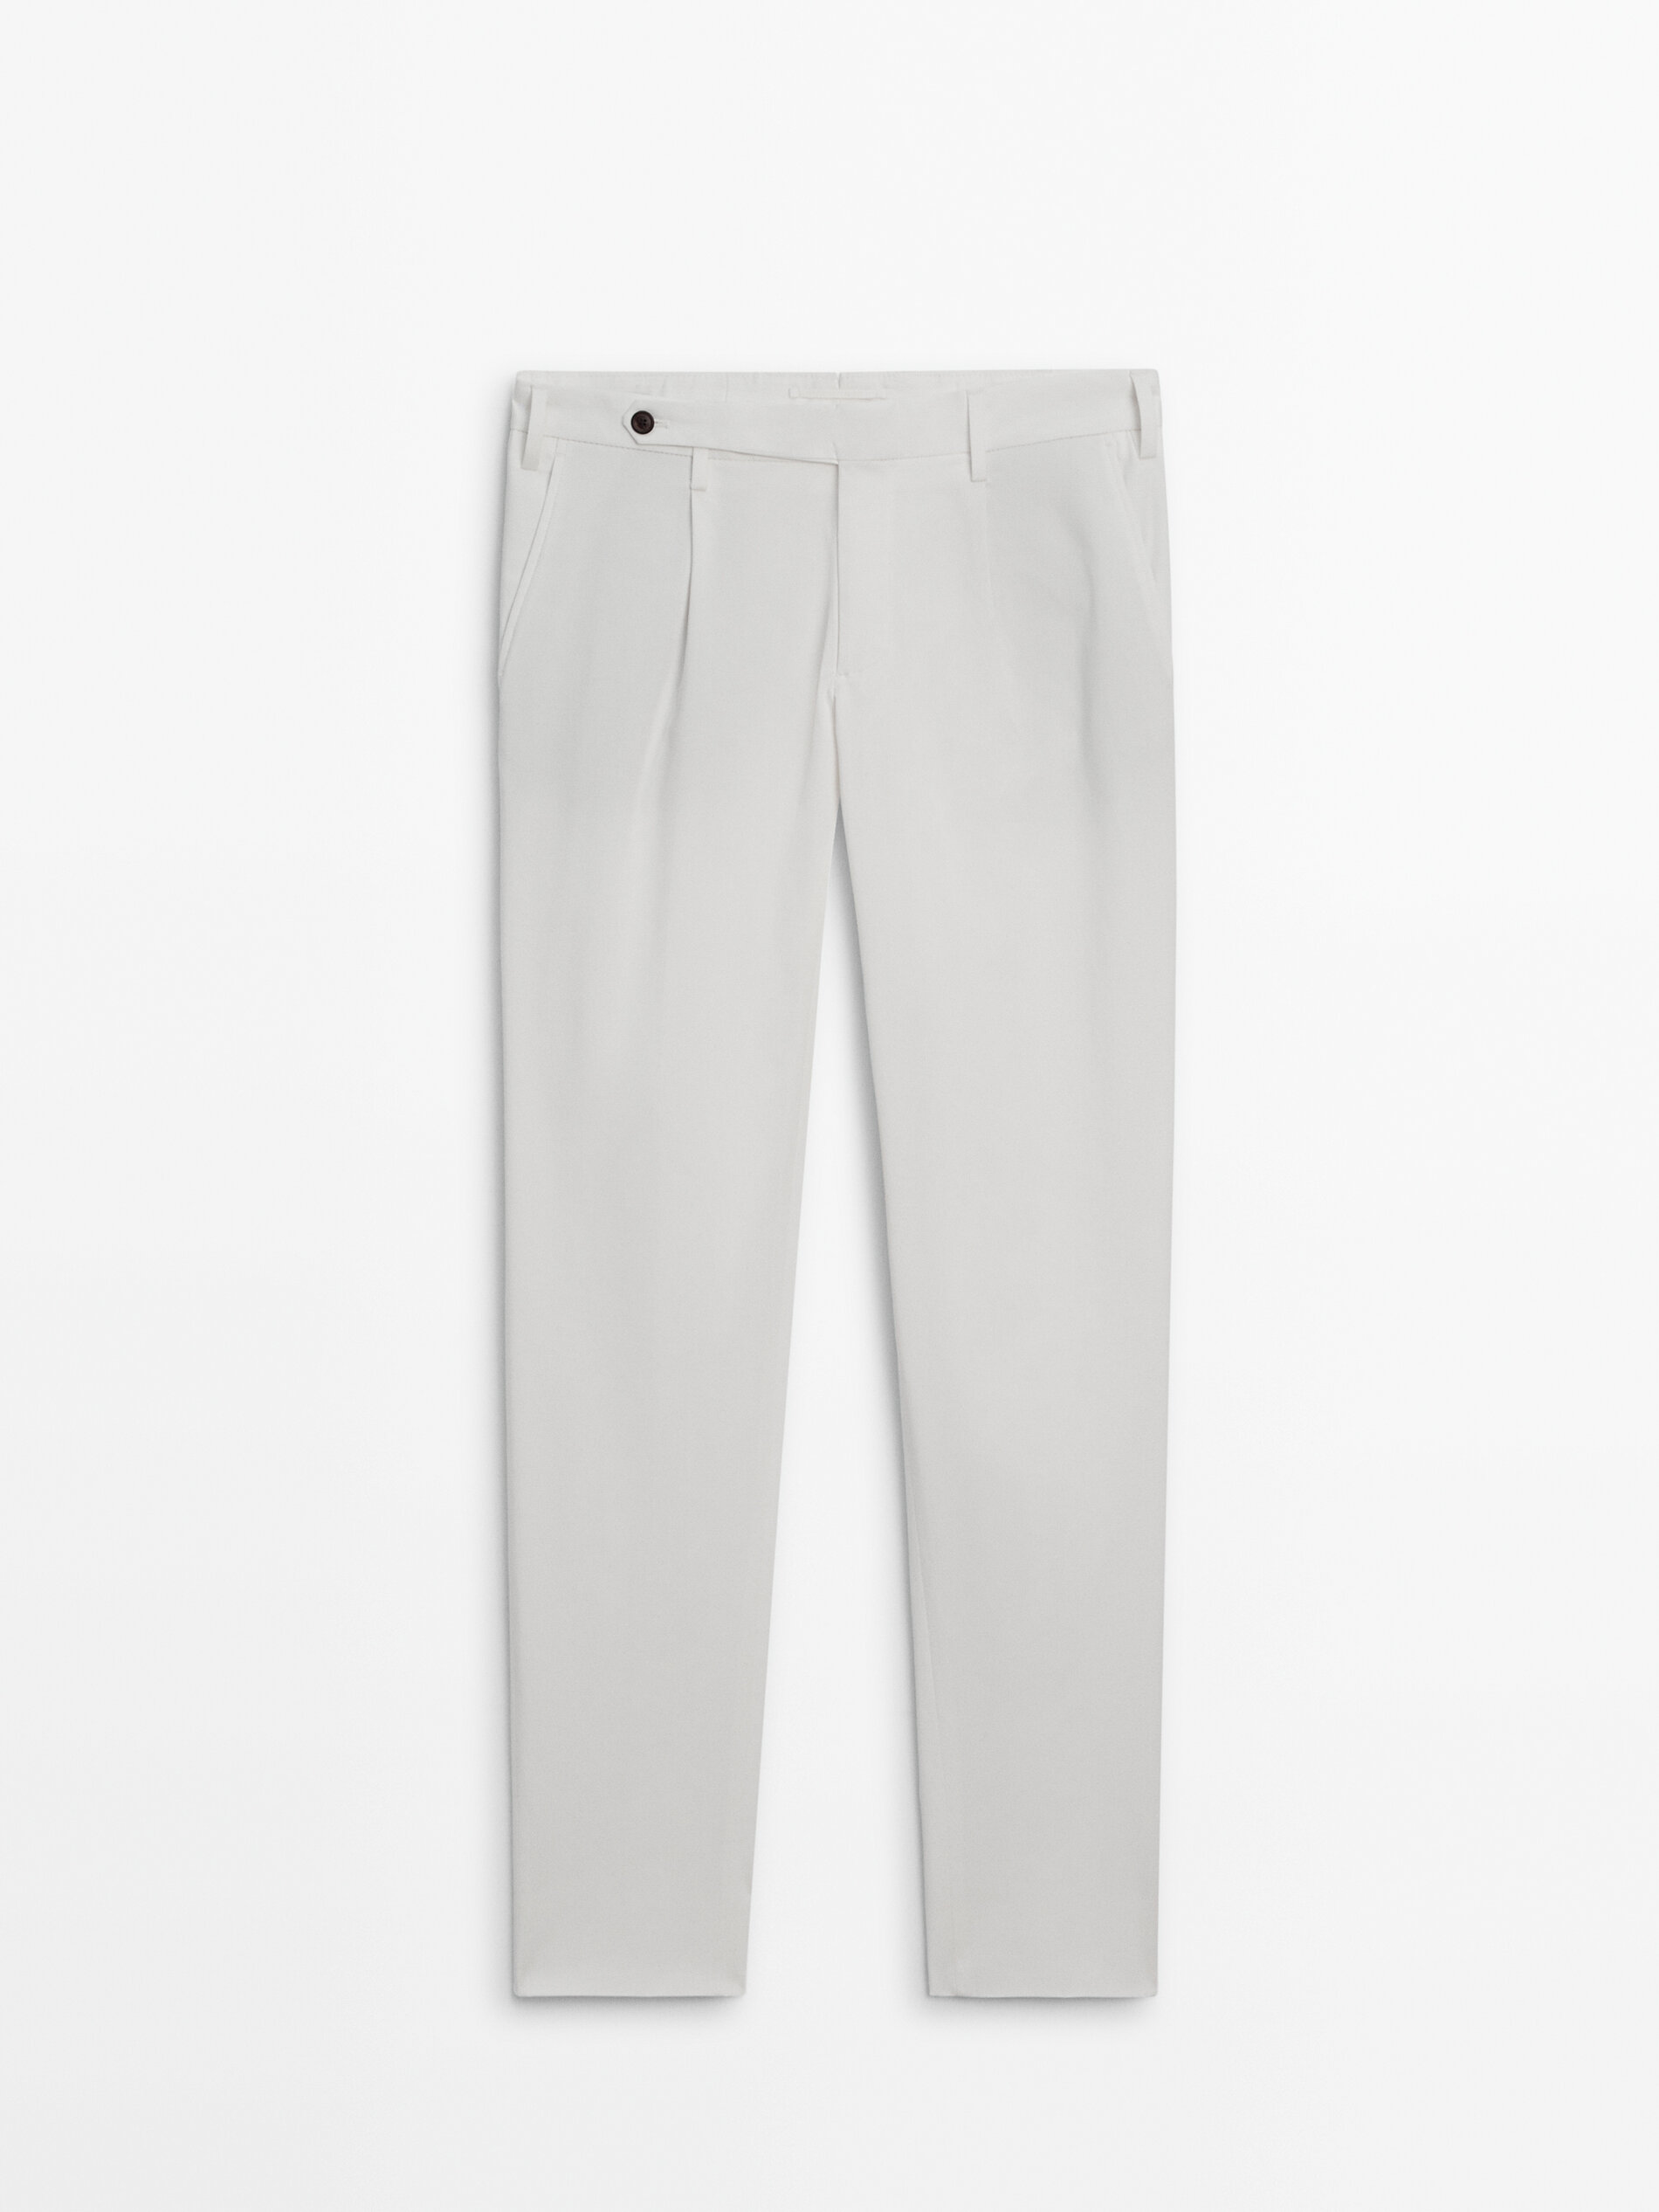 SMART trousers 60% cotton, 40% polyester, grey, 300g/m²